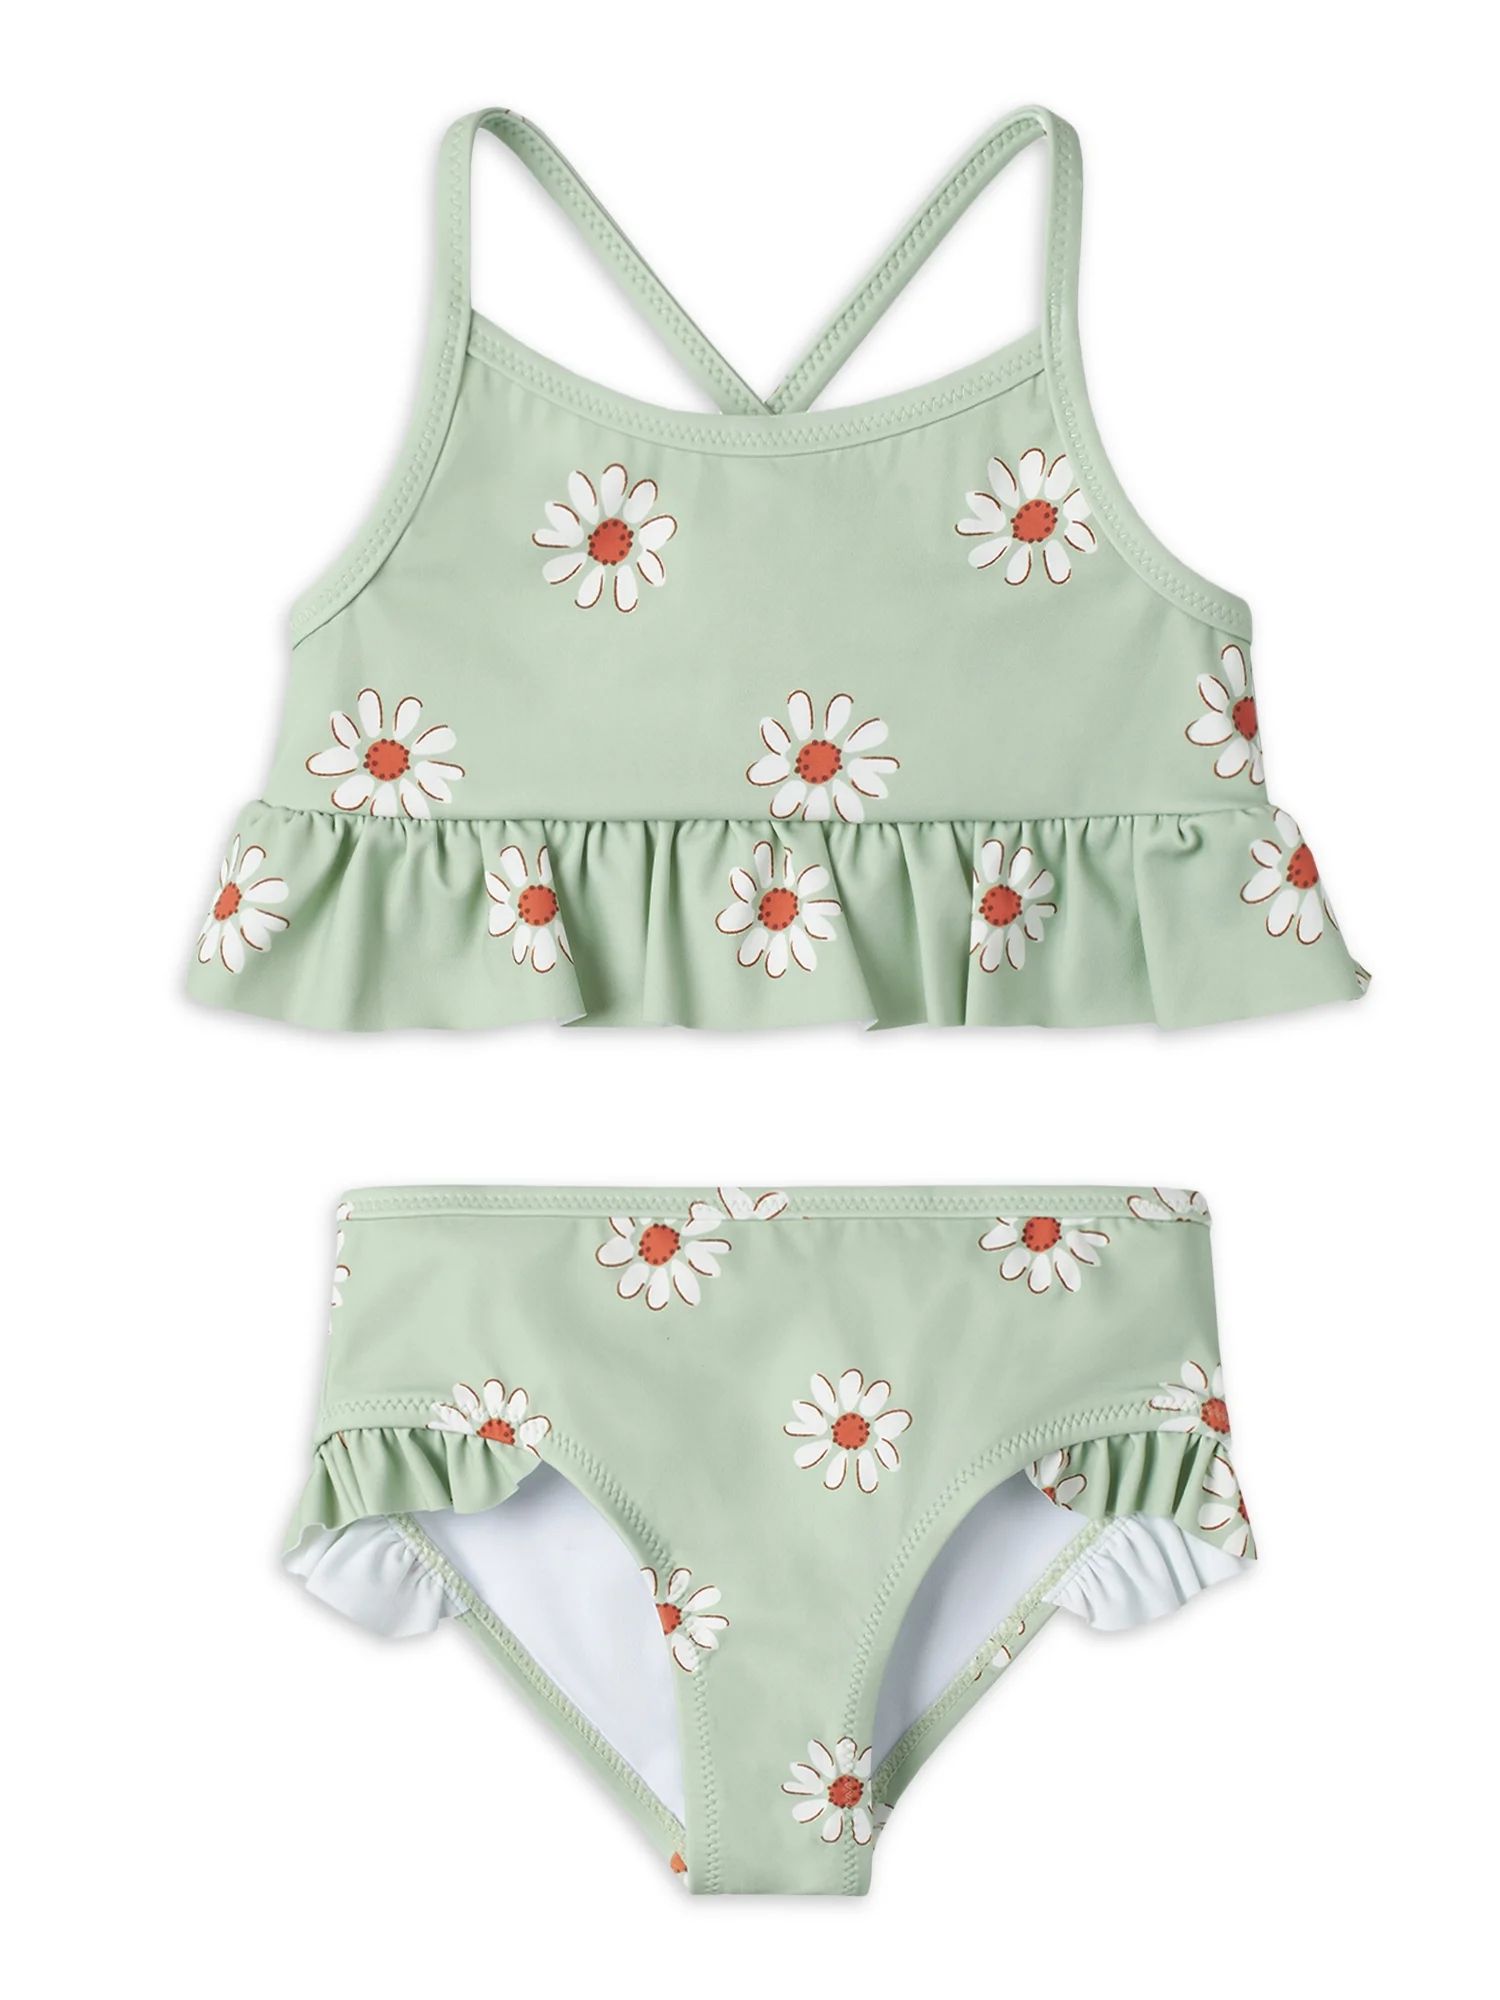 Modern Moments by Gerber Baby and Toddler Girls Ruffle Bikini with UPF 50+, 2-Piece, Sizes 12M-5T | Walmart (US)